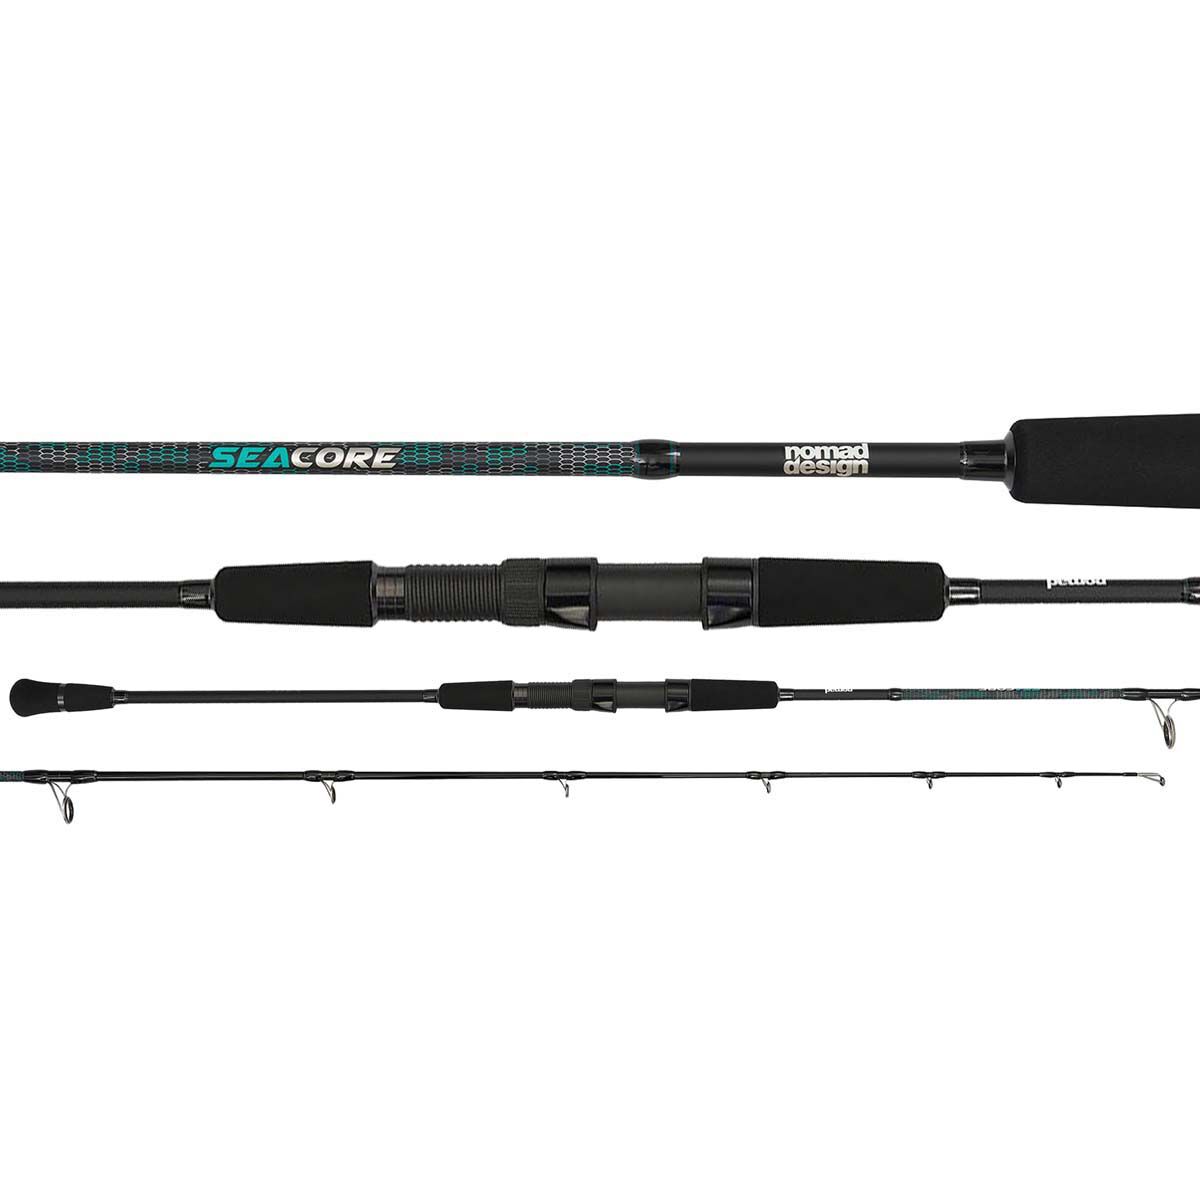 Nomad Seacore Slow Pitch Jigging Spinning Rod